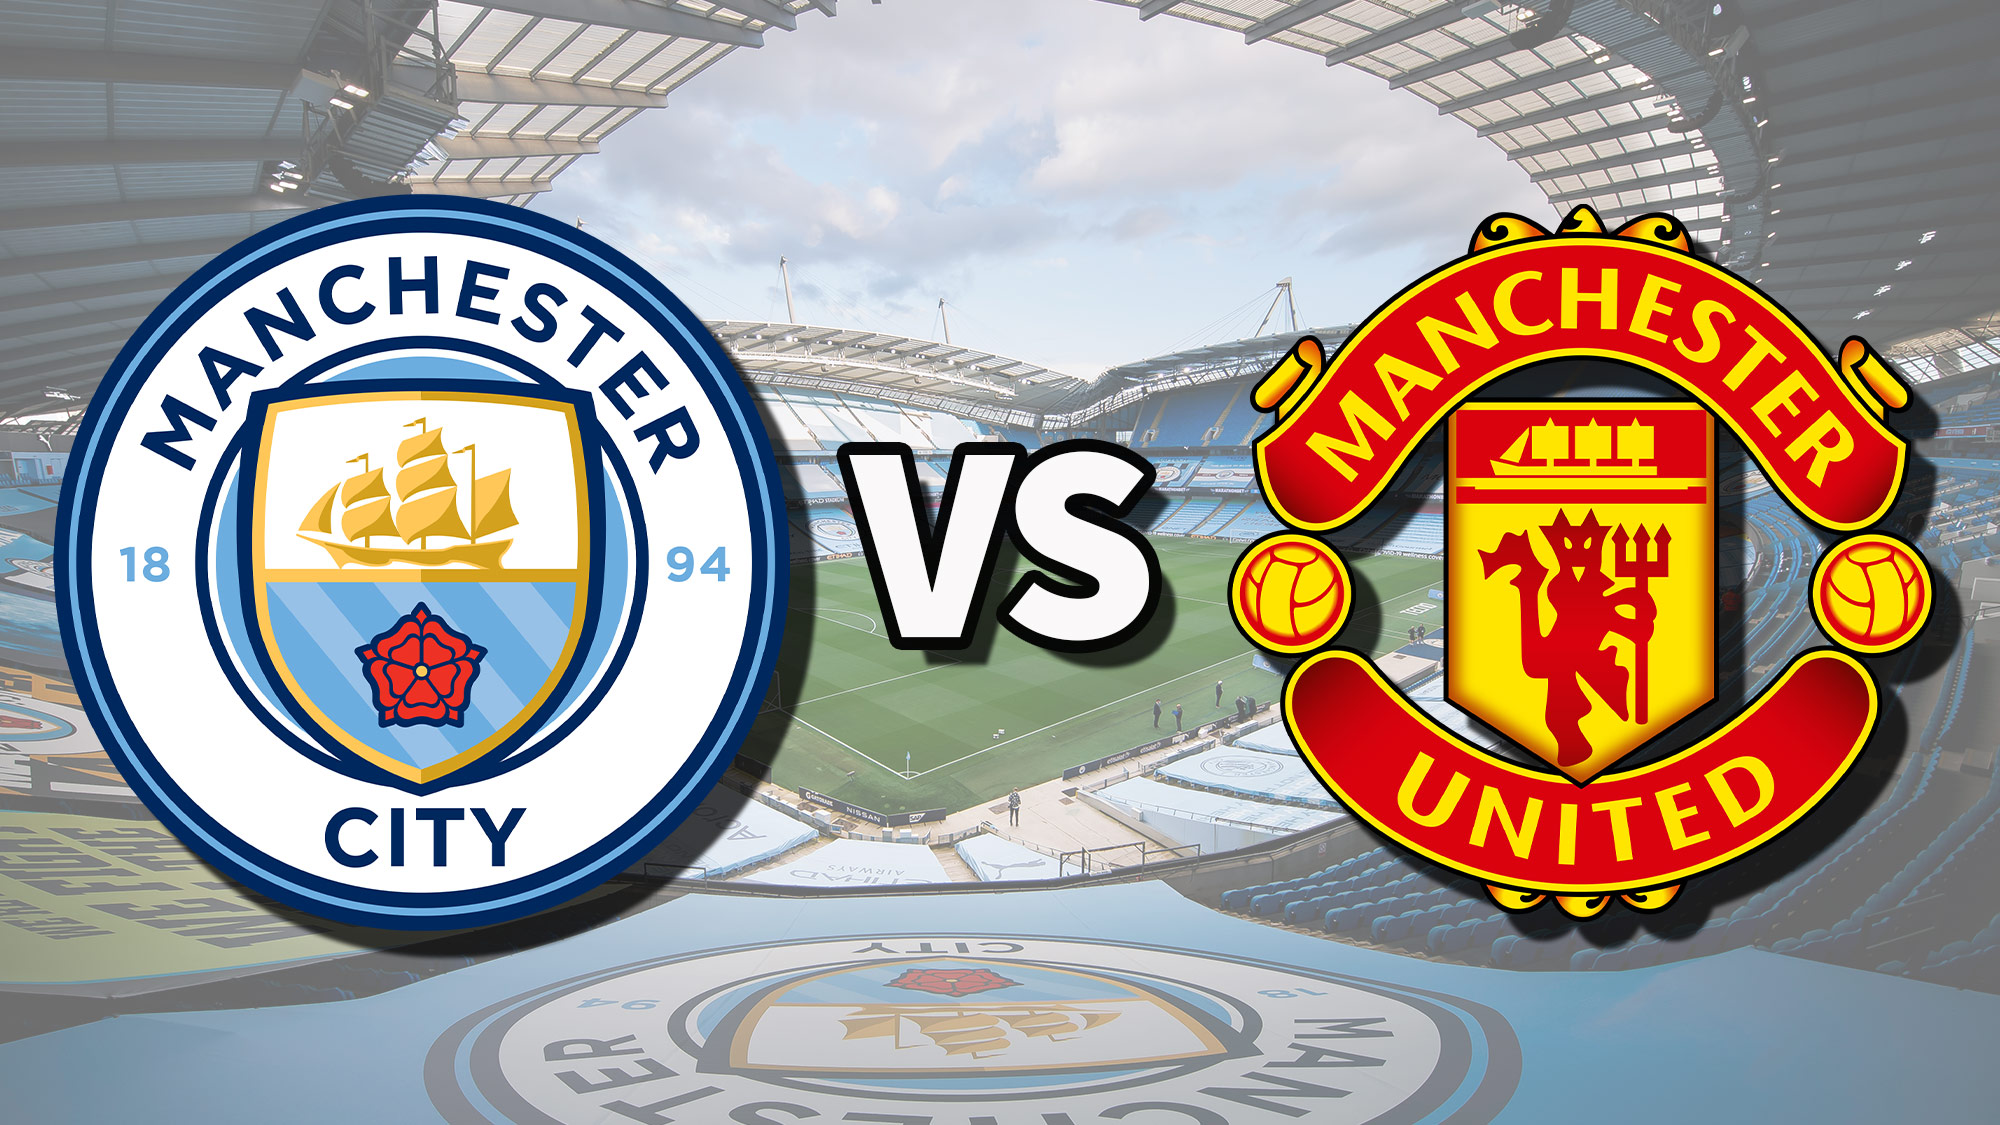 Man City vs Man Utd live stream and how to watch Premier League game